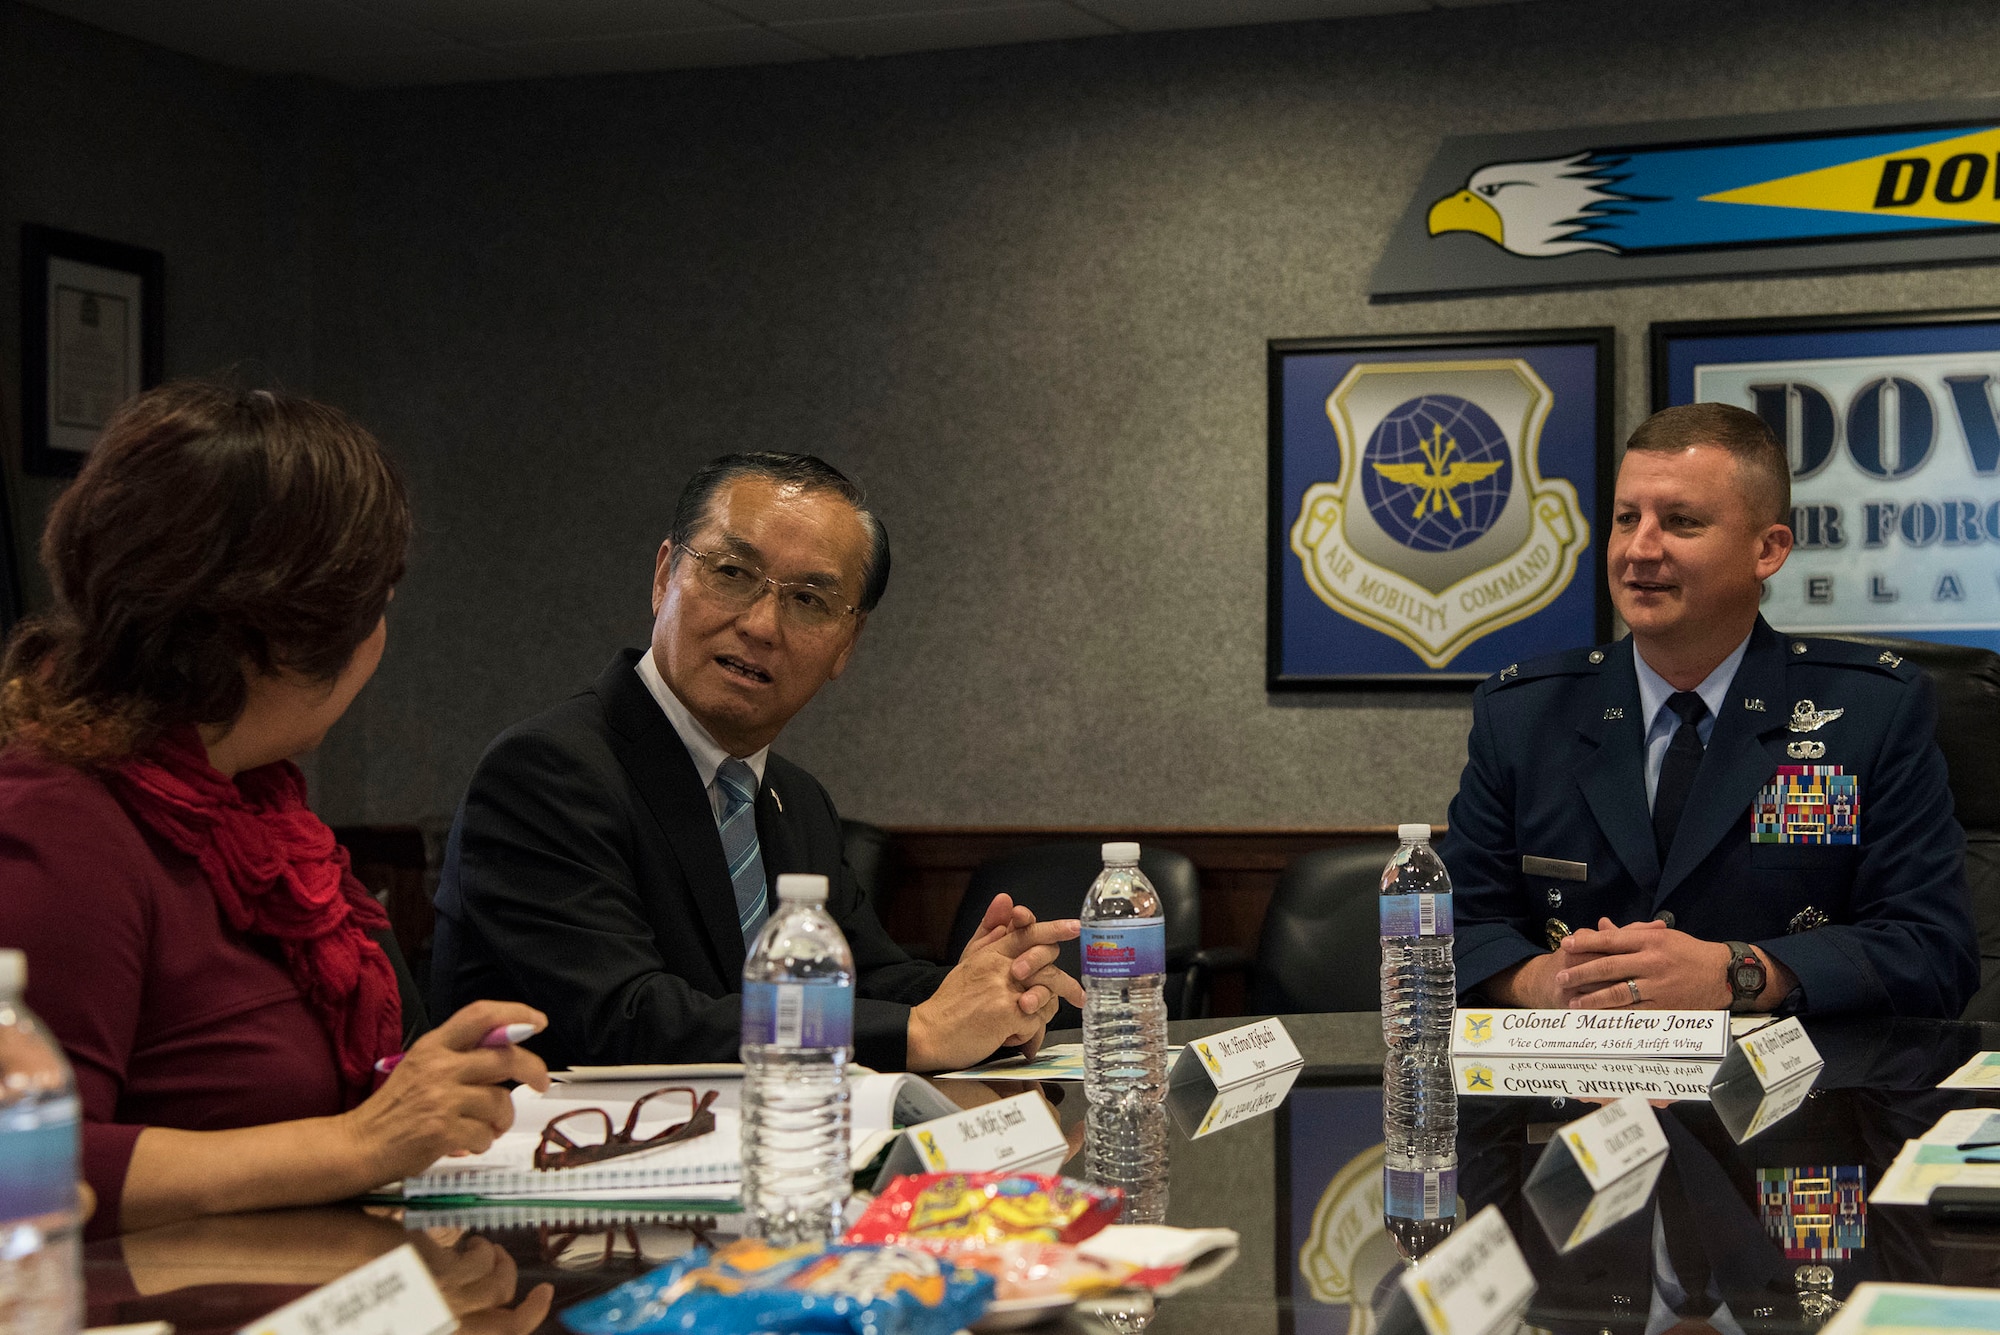 Hiroo Kikuchi, Iwanuma City mayor, and Col. Matthew Jones, 436th Airlift Wing vice commander, talk during a brief Oct. 23, 2018, at Dover Air Force Base, Del. Members from Iwanuma, Japan, met with 436th AW leadership for a tour of Dover AFB to exemplify the growing bond between the “sister cities”. (U.S. Air Force photo by Airman 1st Class Zoe M. Wockenfuss)